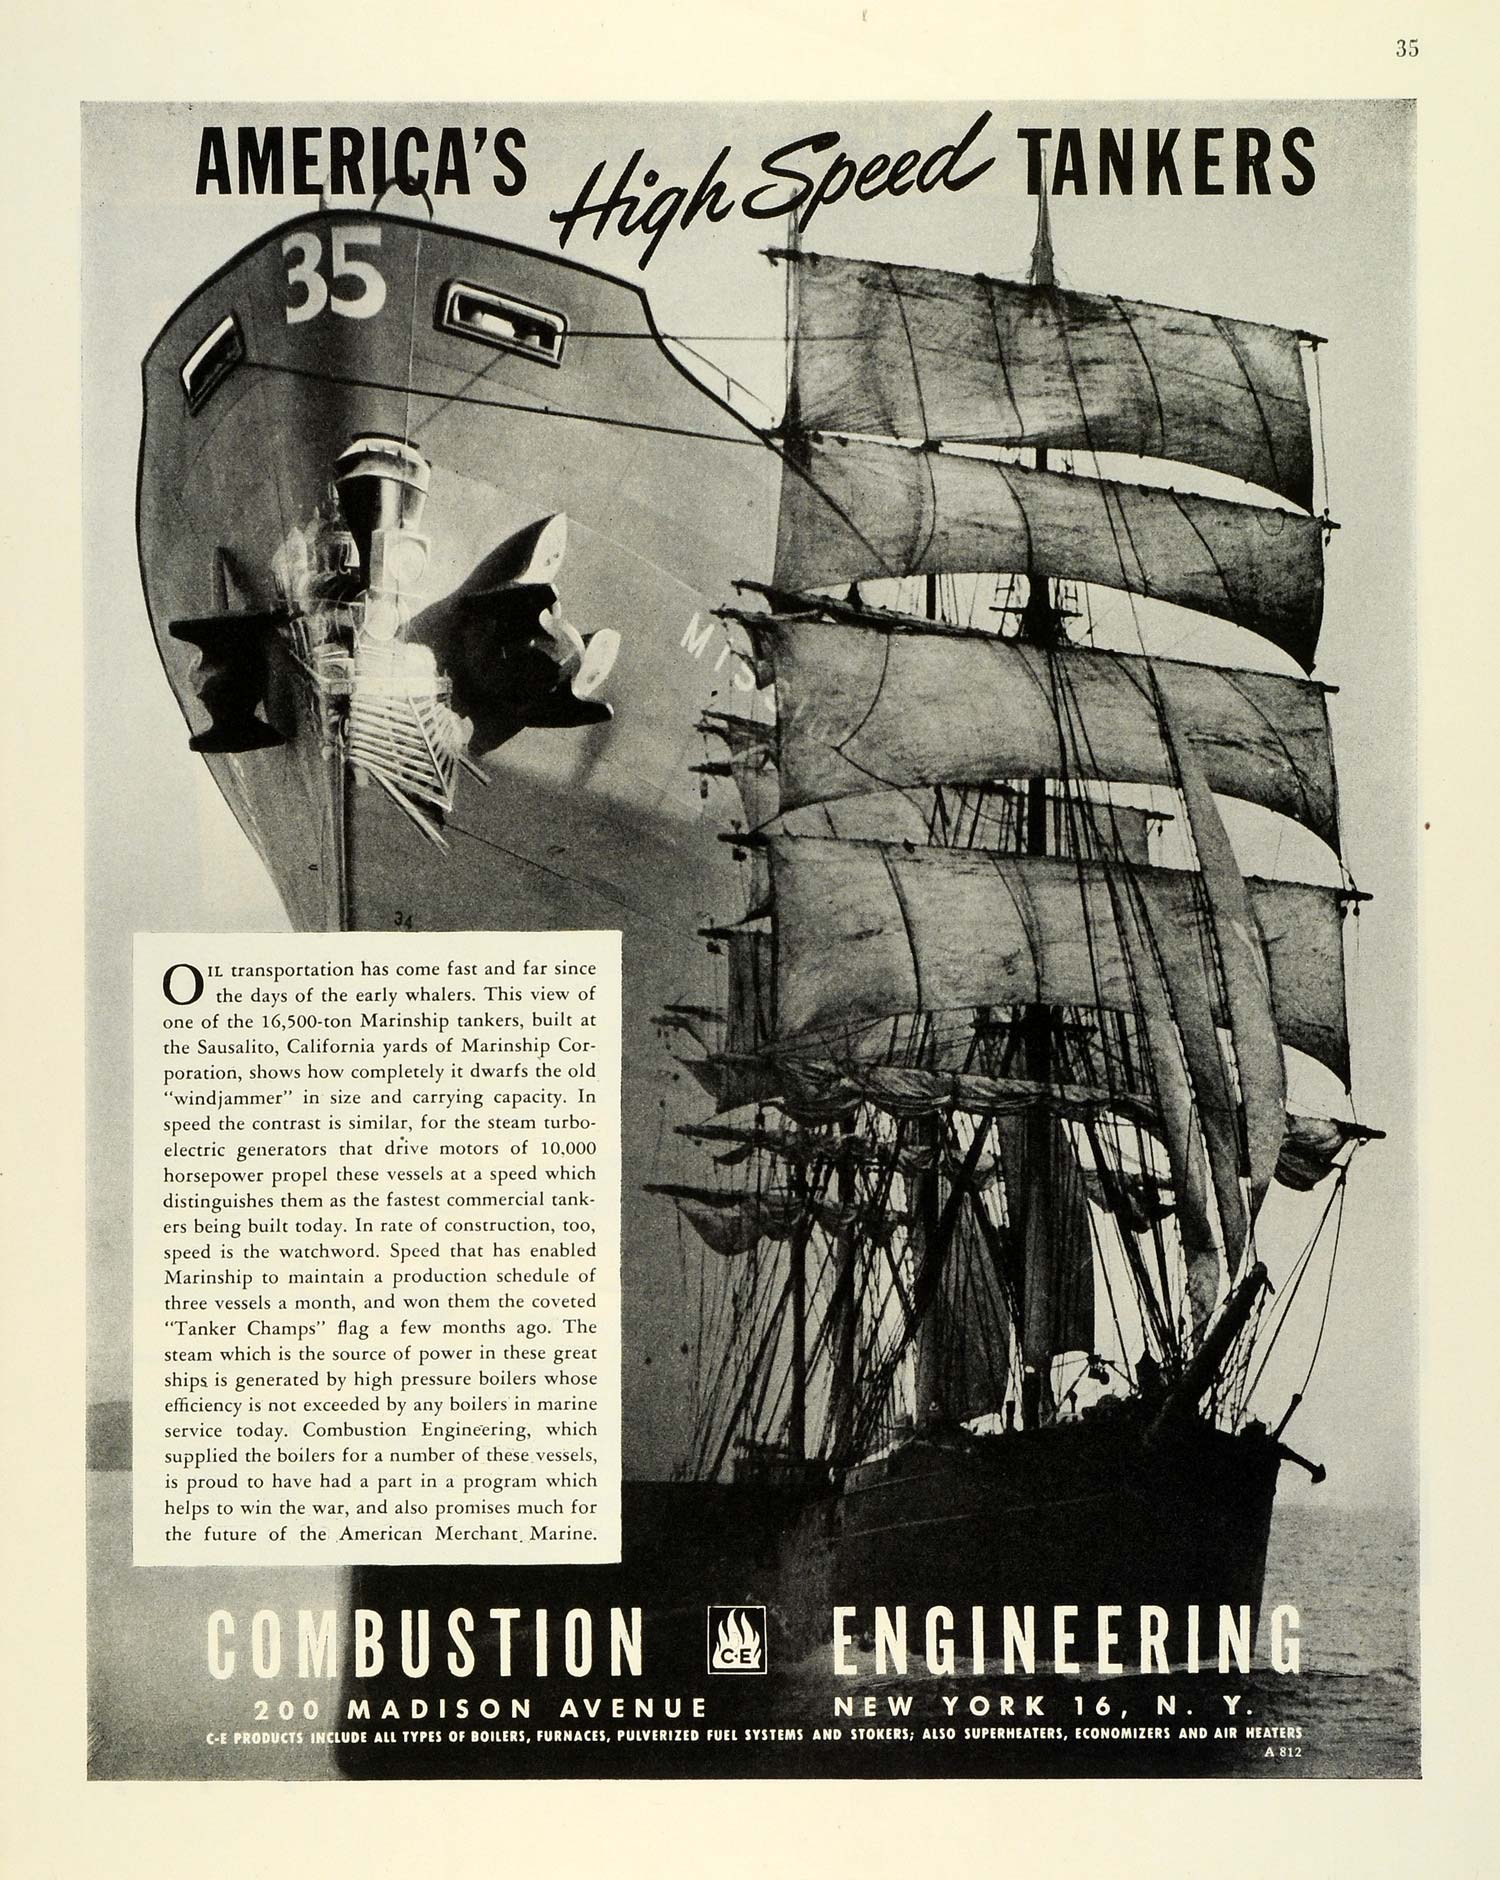 1944 Ad Combustion Engineering WWII War Production Marinship Tankers Navy FZ6